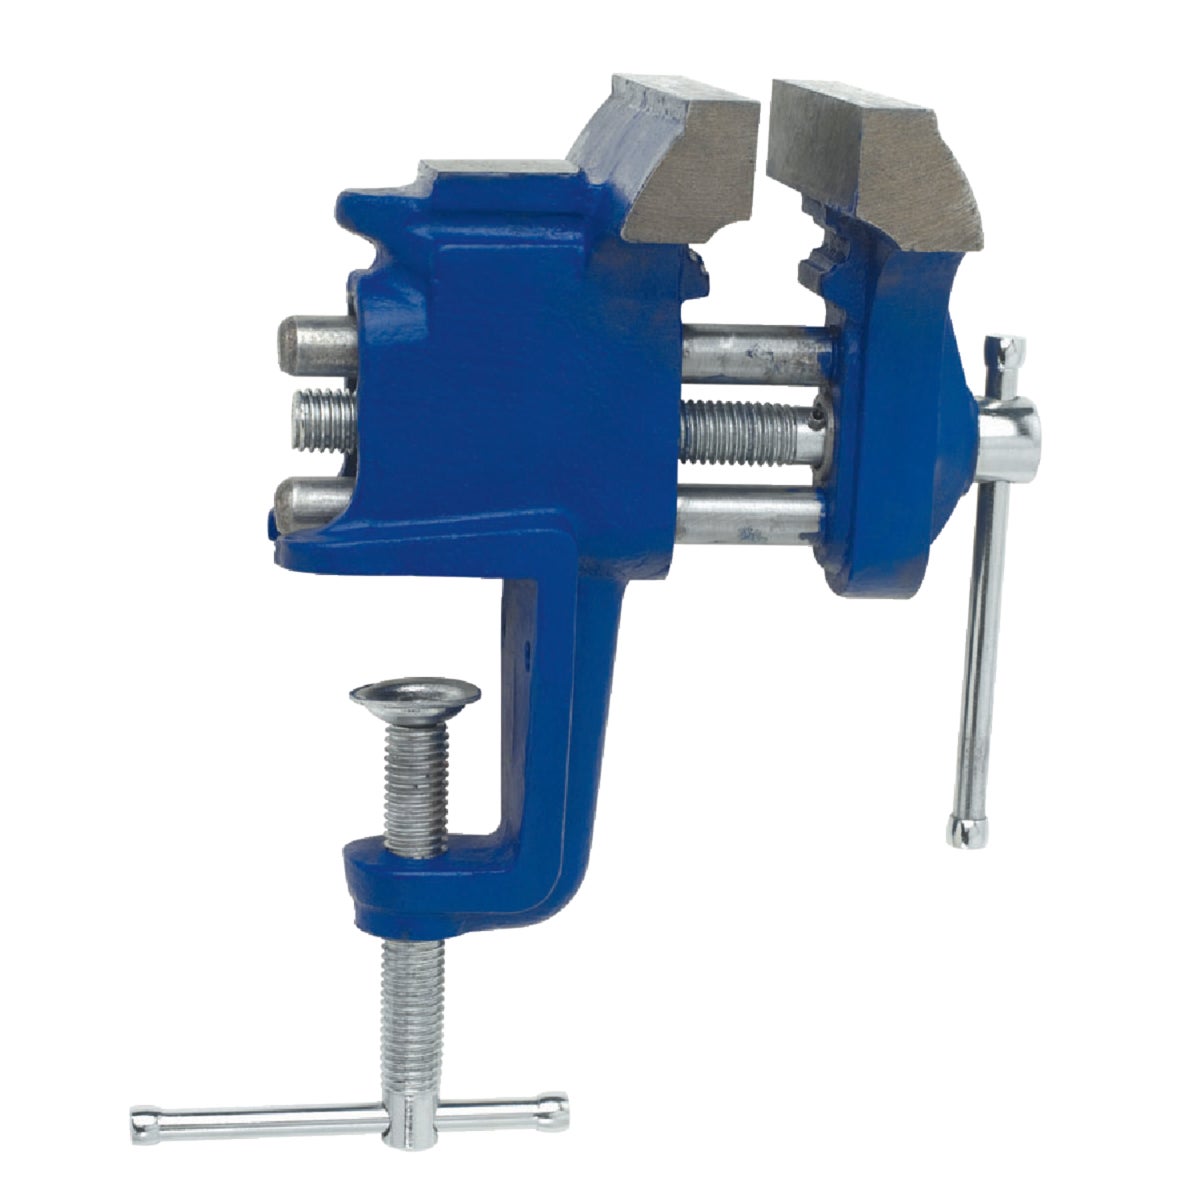 Clamp-On Vise